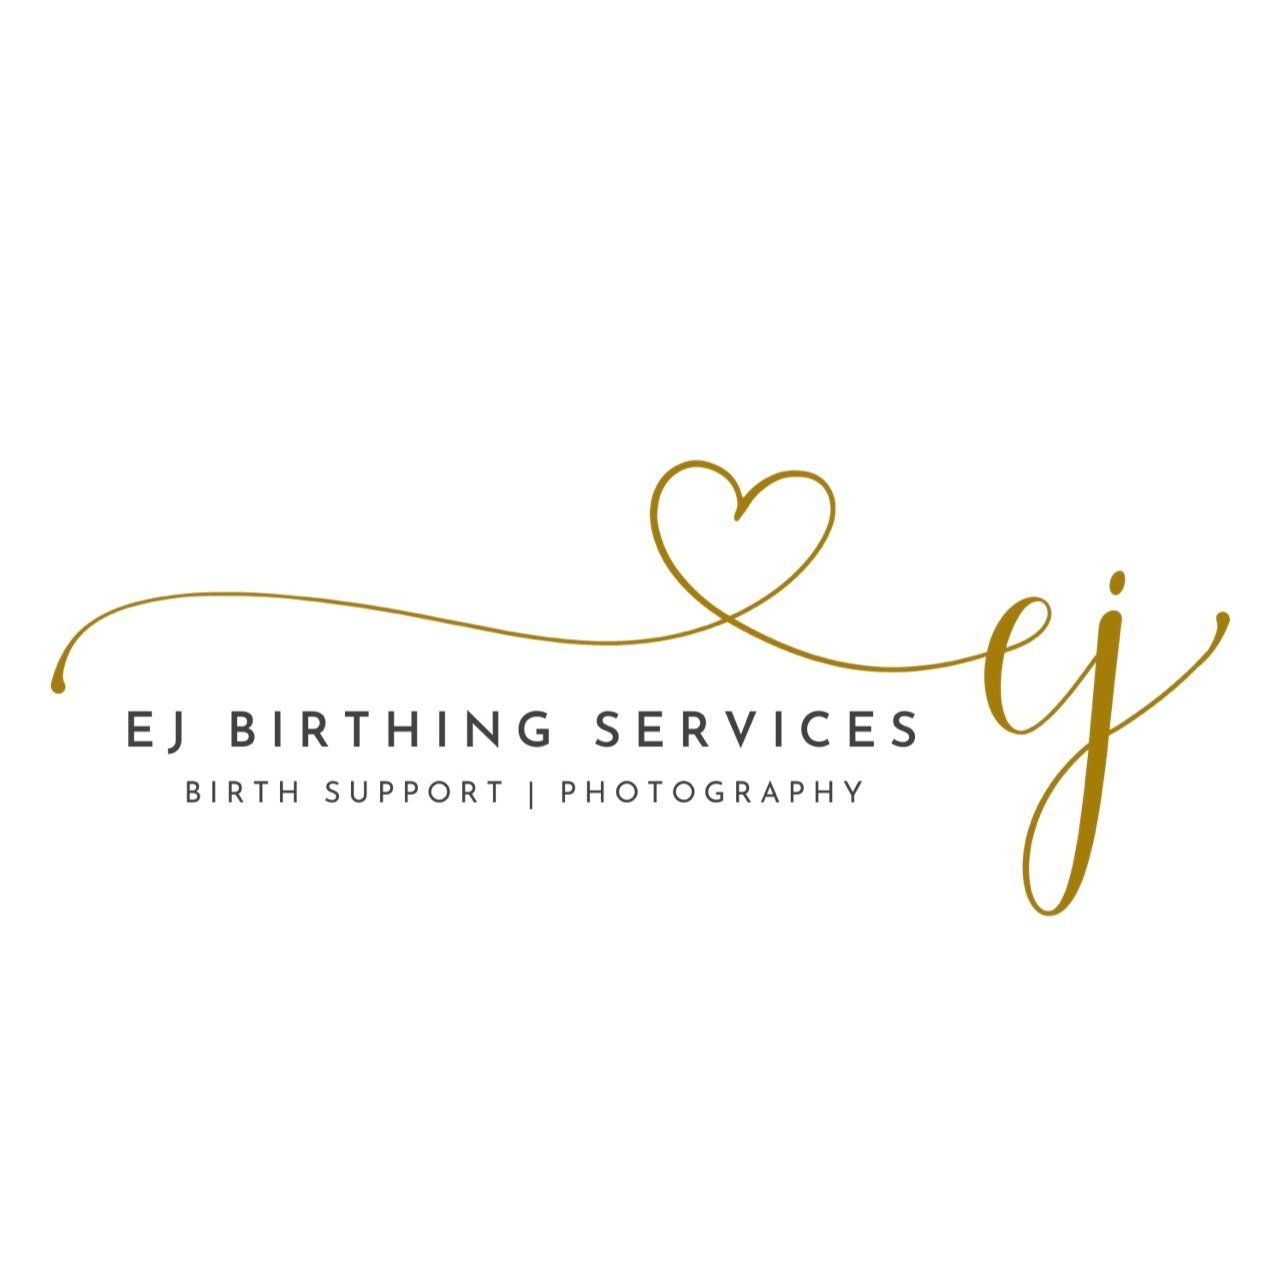 EJ Birthing Services